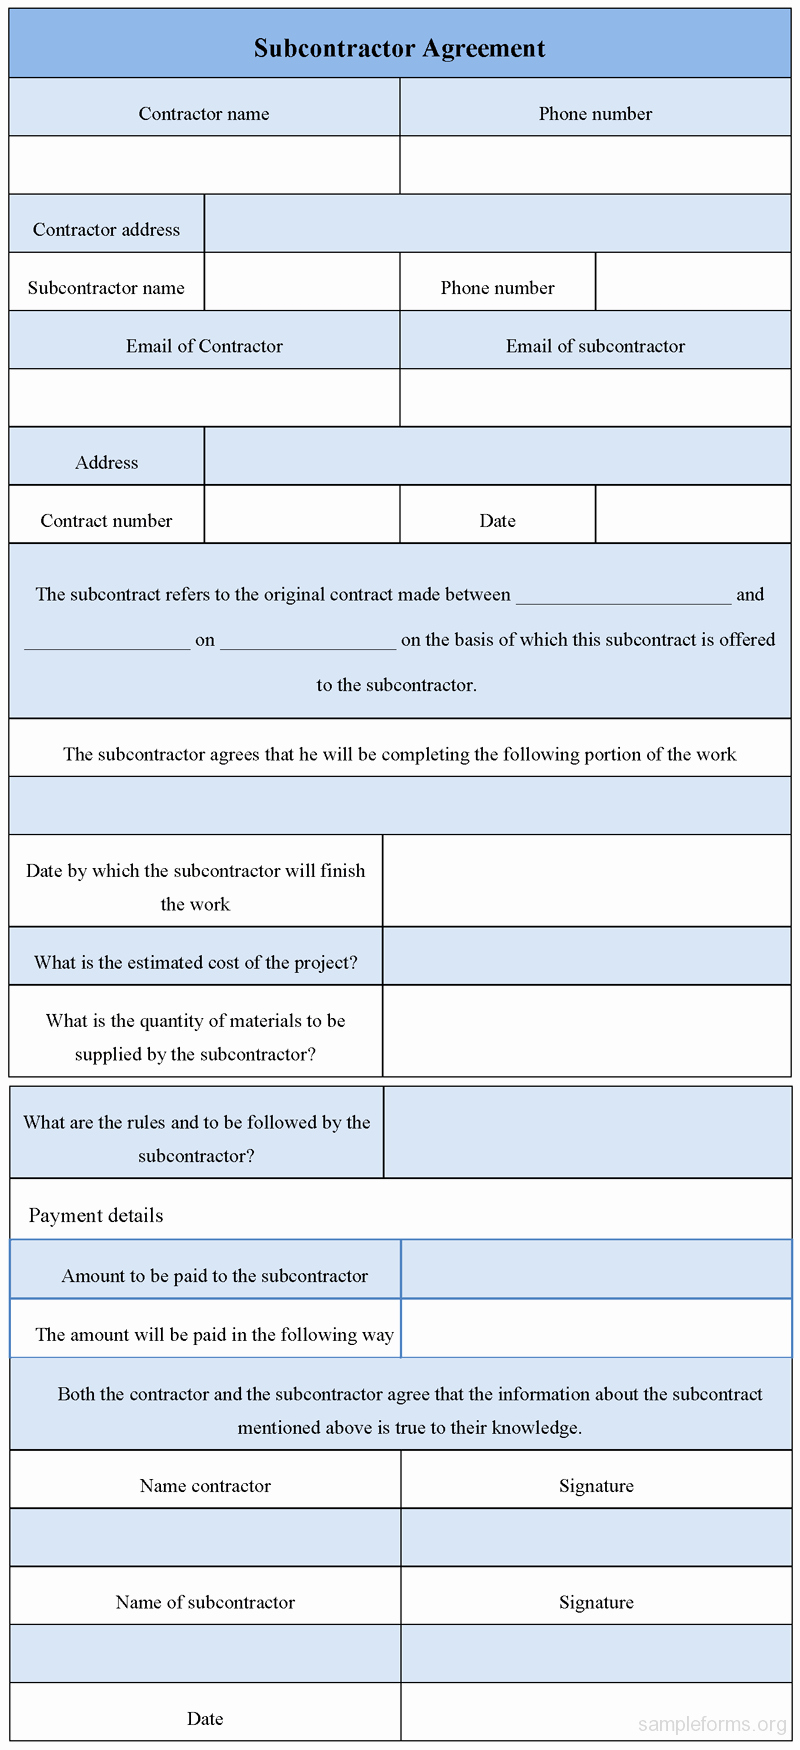 Subcontractor Agreement form Sample forms